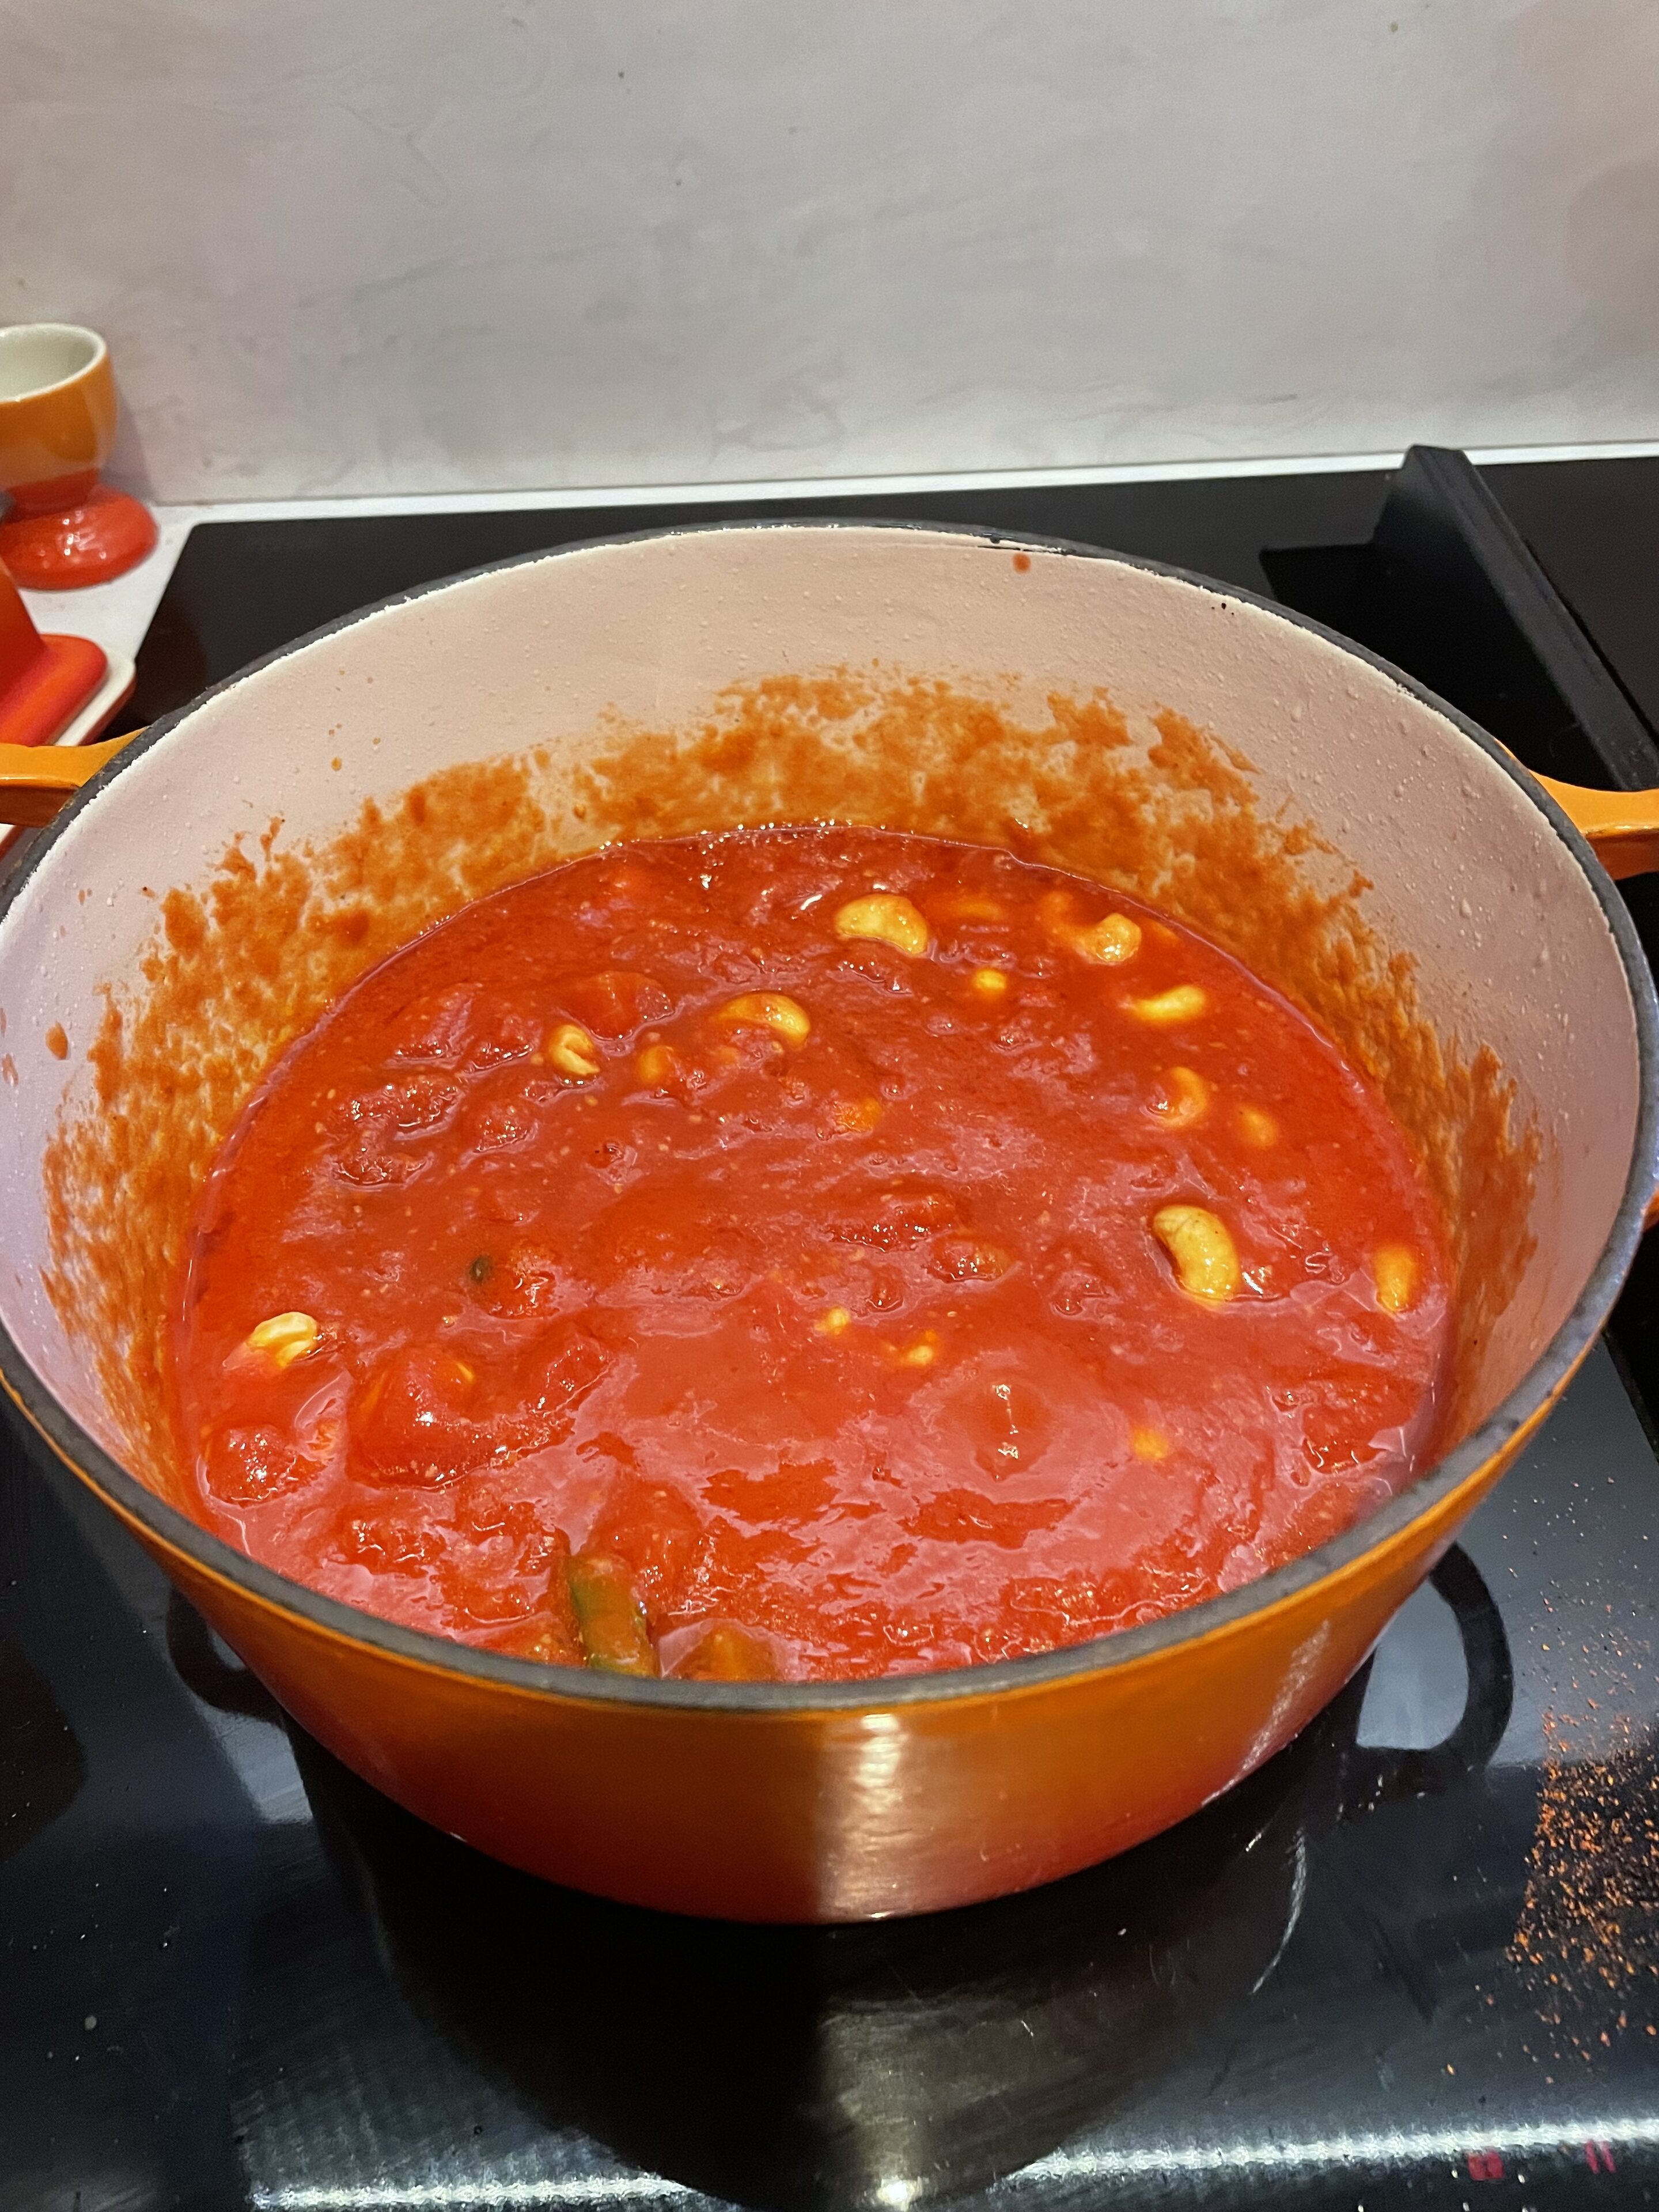 Pistonheads - The image displays a cooking scene with a focus on the preparation of a tomato-based sauce. A large pot sits on top of a stove, filled with red sauce and a few chunks of meat. The sauce is rich and red, suggesting it could be a chili or spaghetti sauce. To the right of the pot, there are fresh red bell peppers and several tomatoes. On the left side of the image, a bowl full of chopped garlic can be seen, indicating that it might be used as an ingredient in this dish. The setting appears to be a kitchen, with a white countertop and a black stove visible in the background.